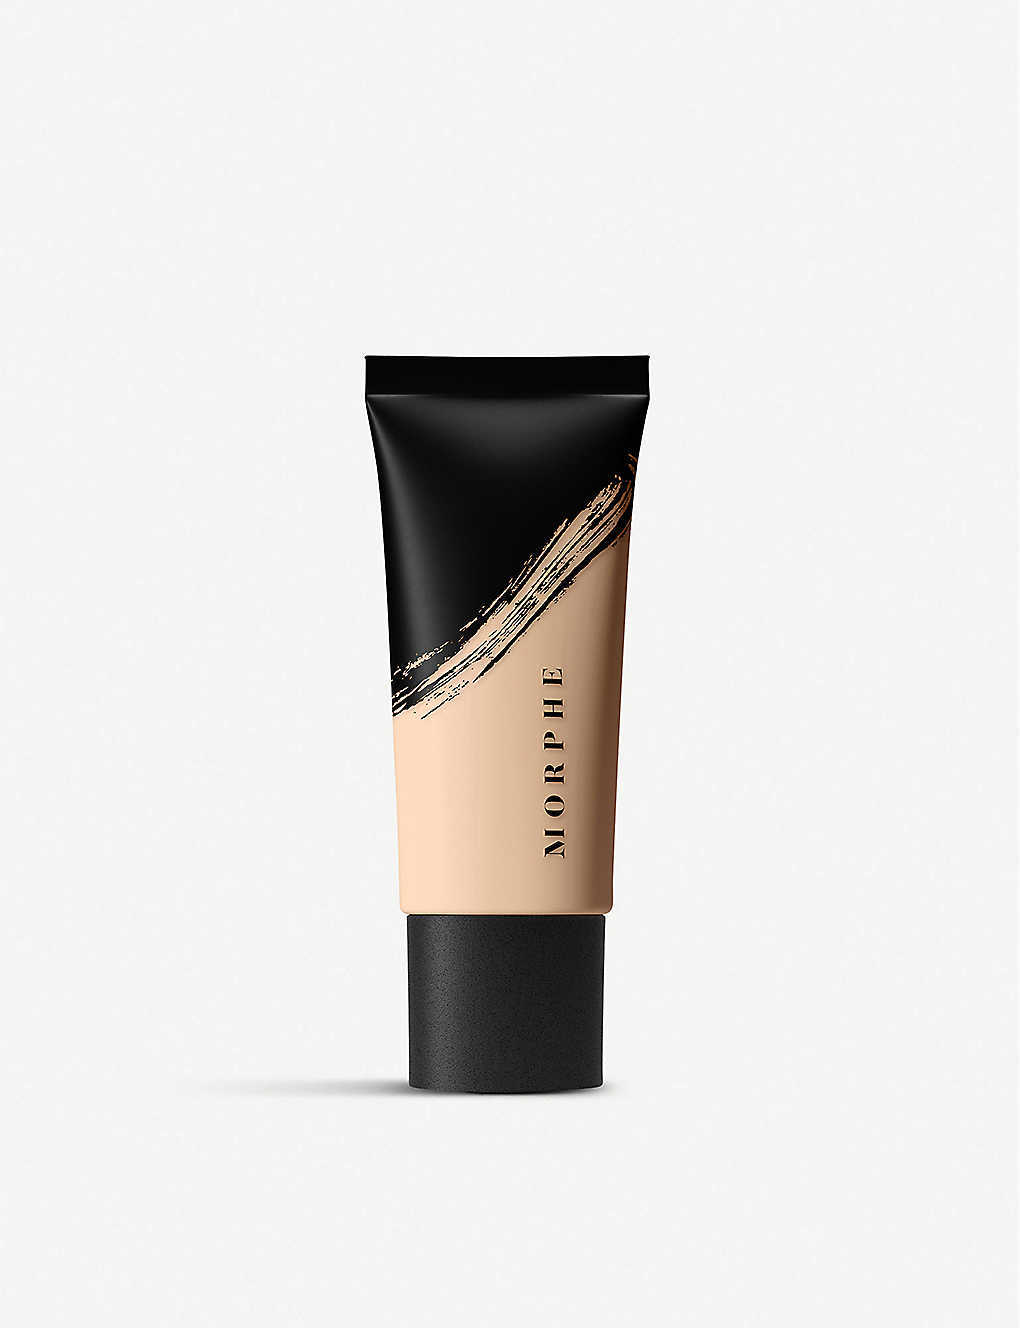 Morphe Fluidity Full-Coverage Foundation - F1.50 NEUTRAL: fair with neutral unde